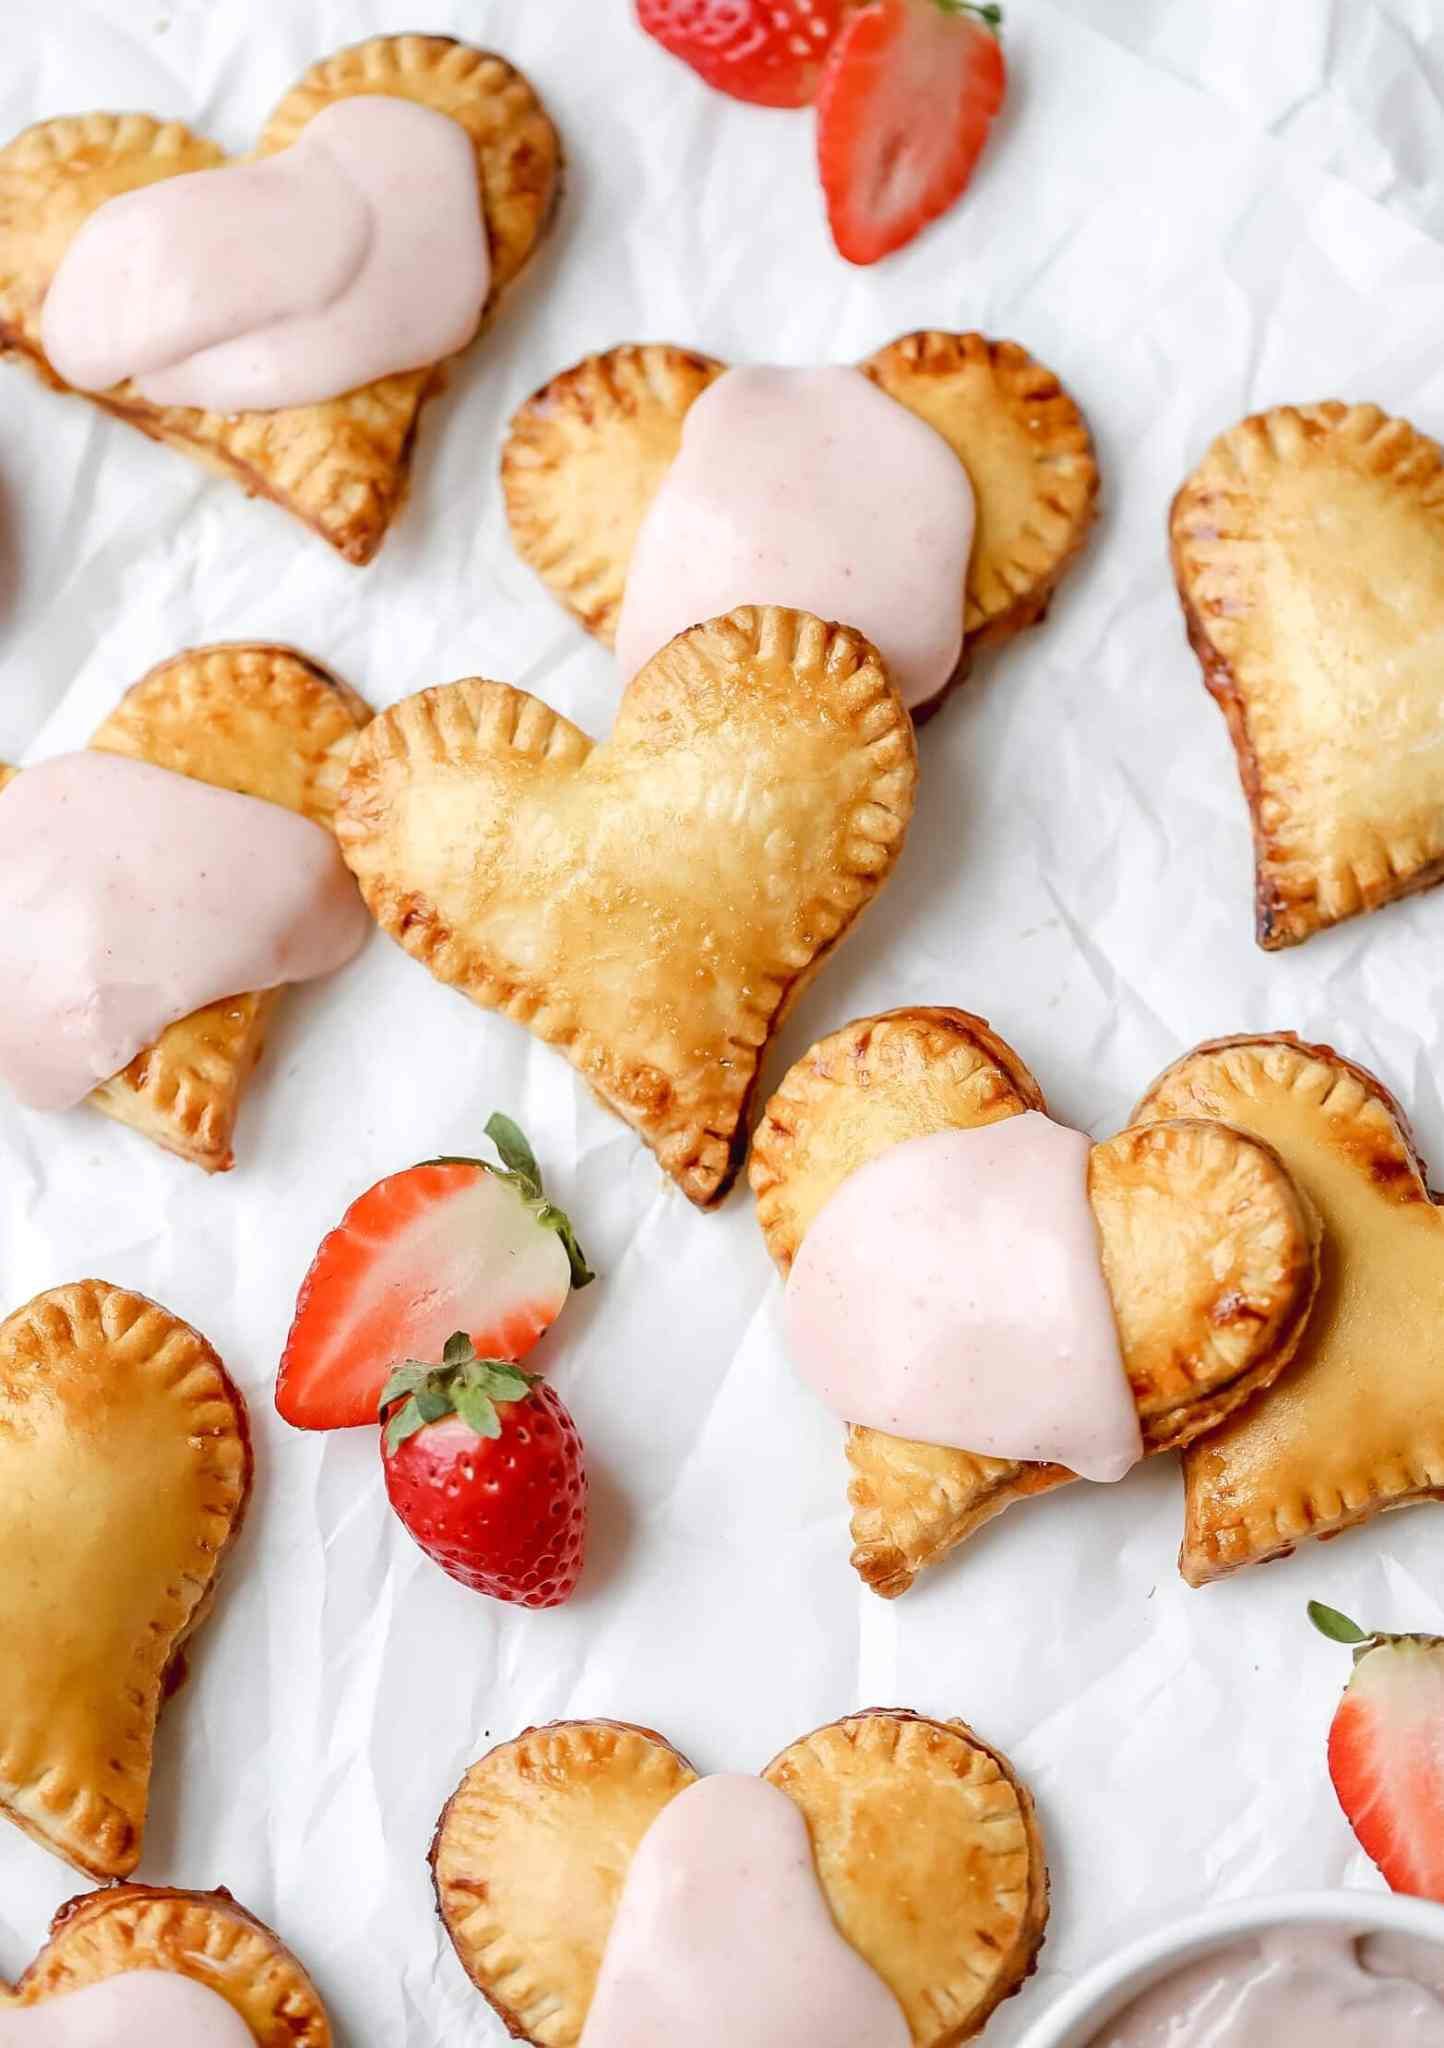 https://hips.hearstapps.com/hmg-prod/images/heart-shaped-foods-strawberry-hand-pies-1643236635.jpeg